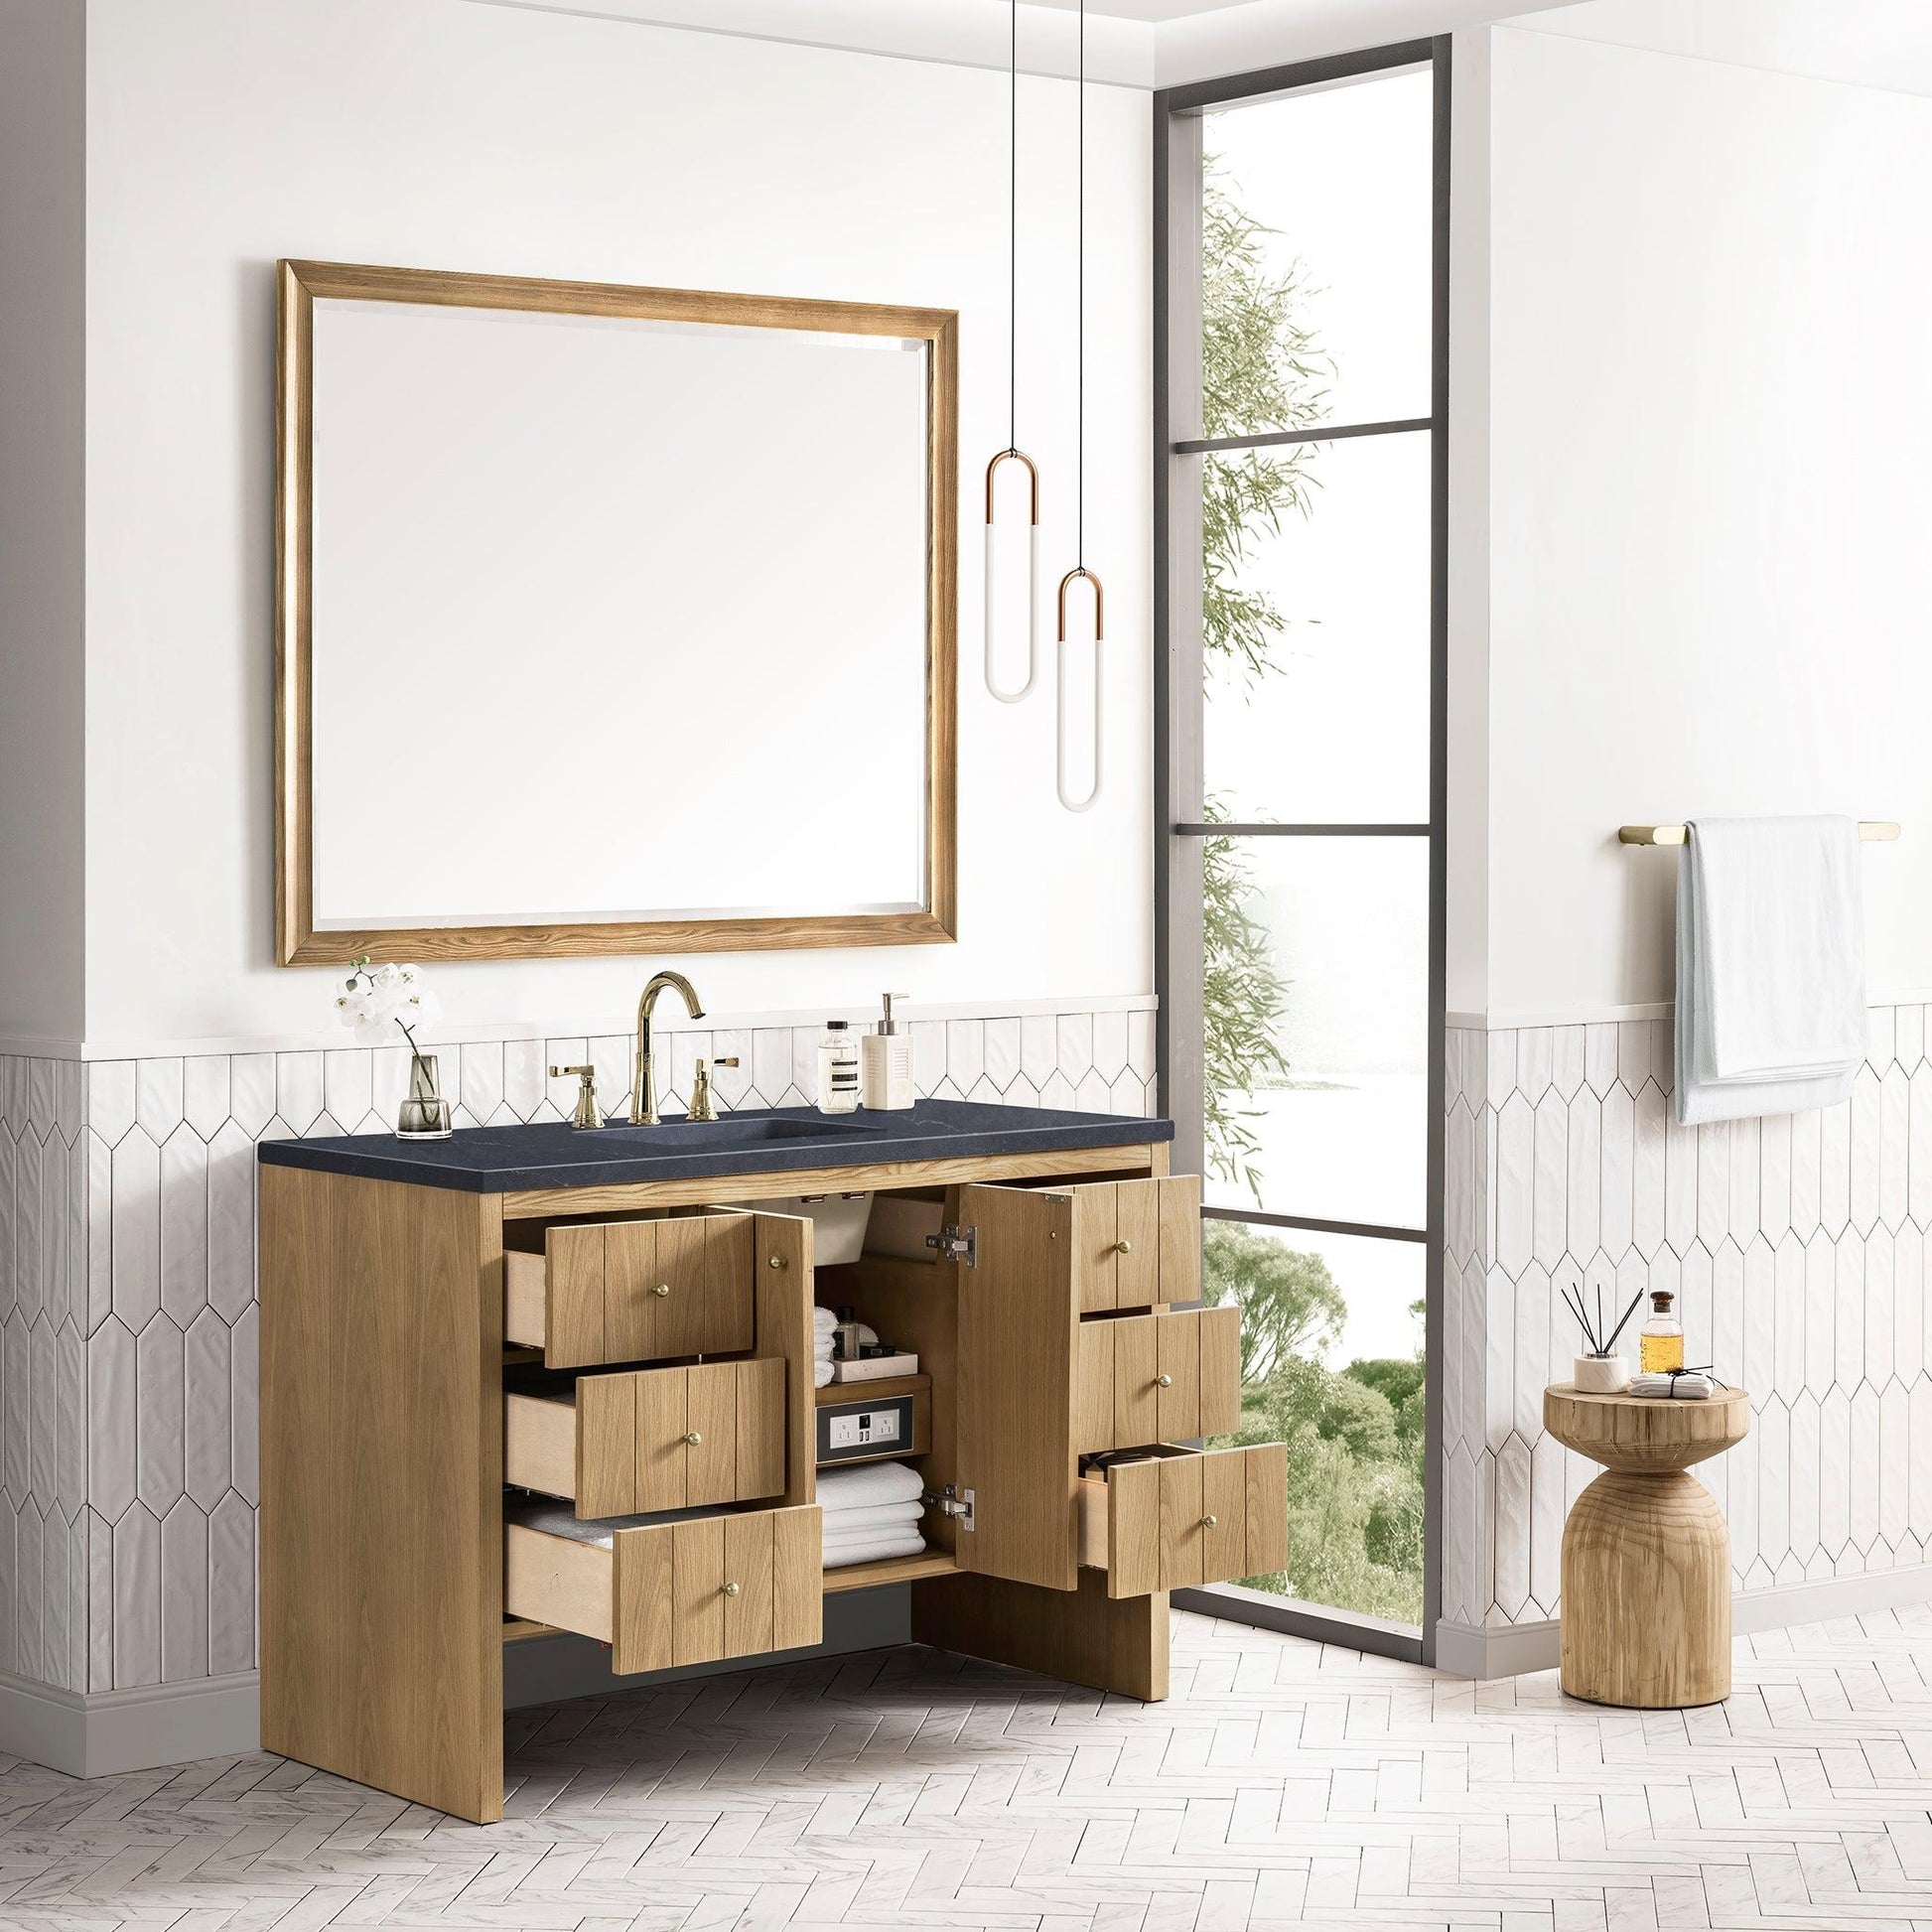 James Martin Columbia 24 Single Bathroom Vanity in Ash Gray and Radiant  Gold with 5 cm White Glossy Stone Top and Rectangular Sink